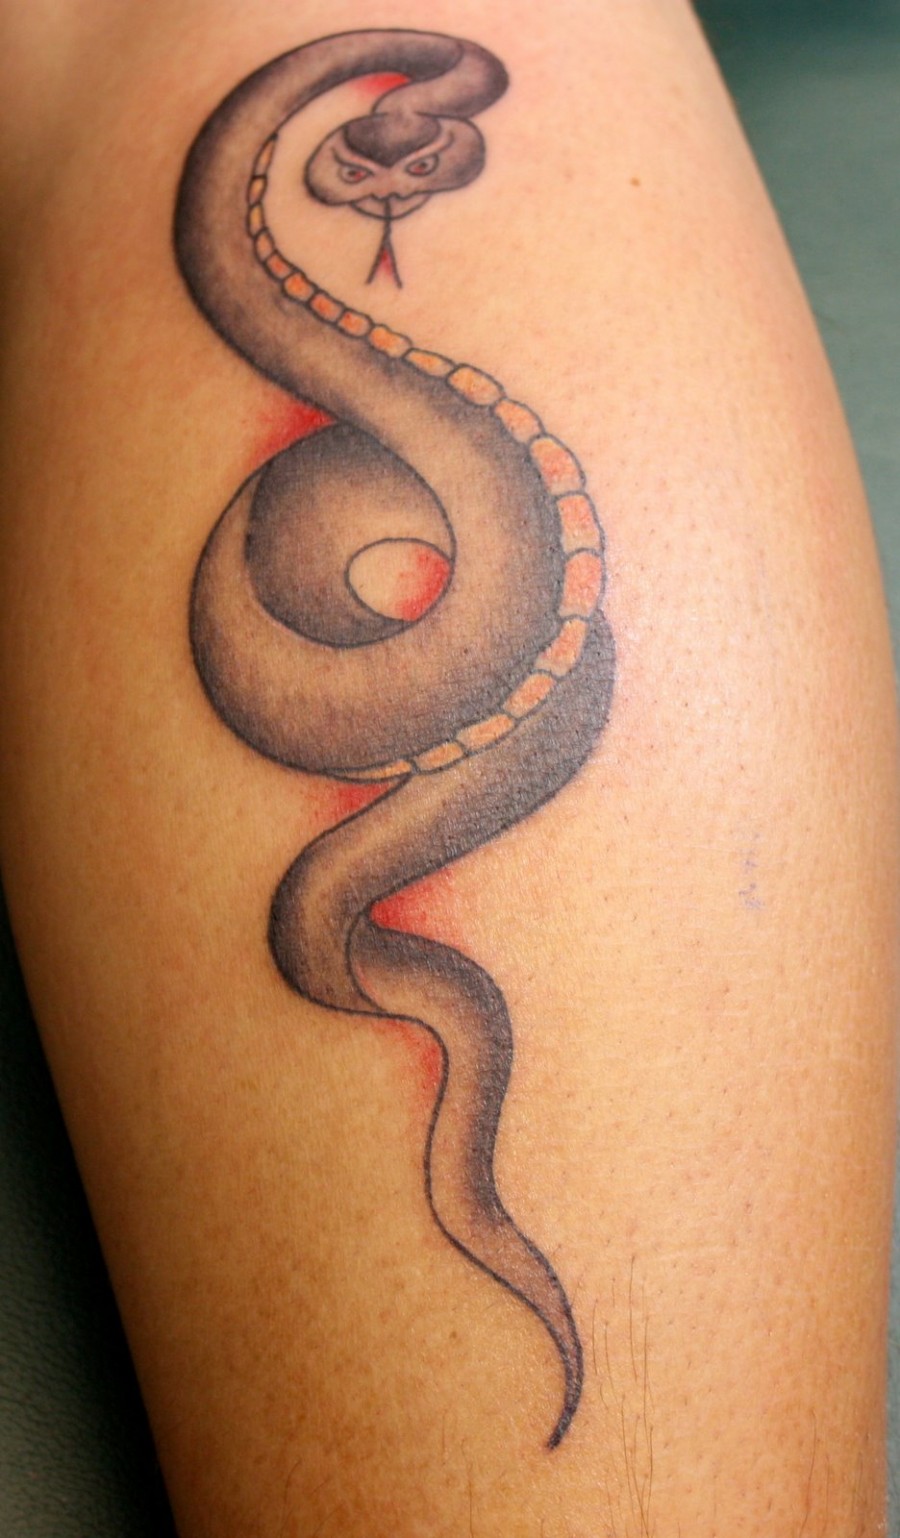 Awesome Snake Tattoo Designs for Women – Animal Tattoos